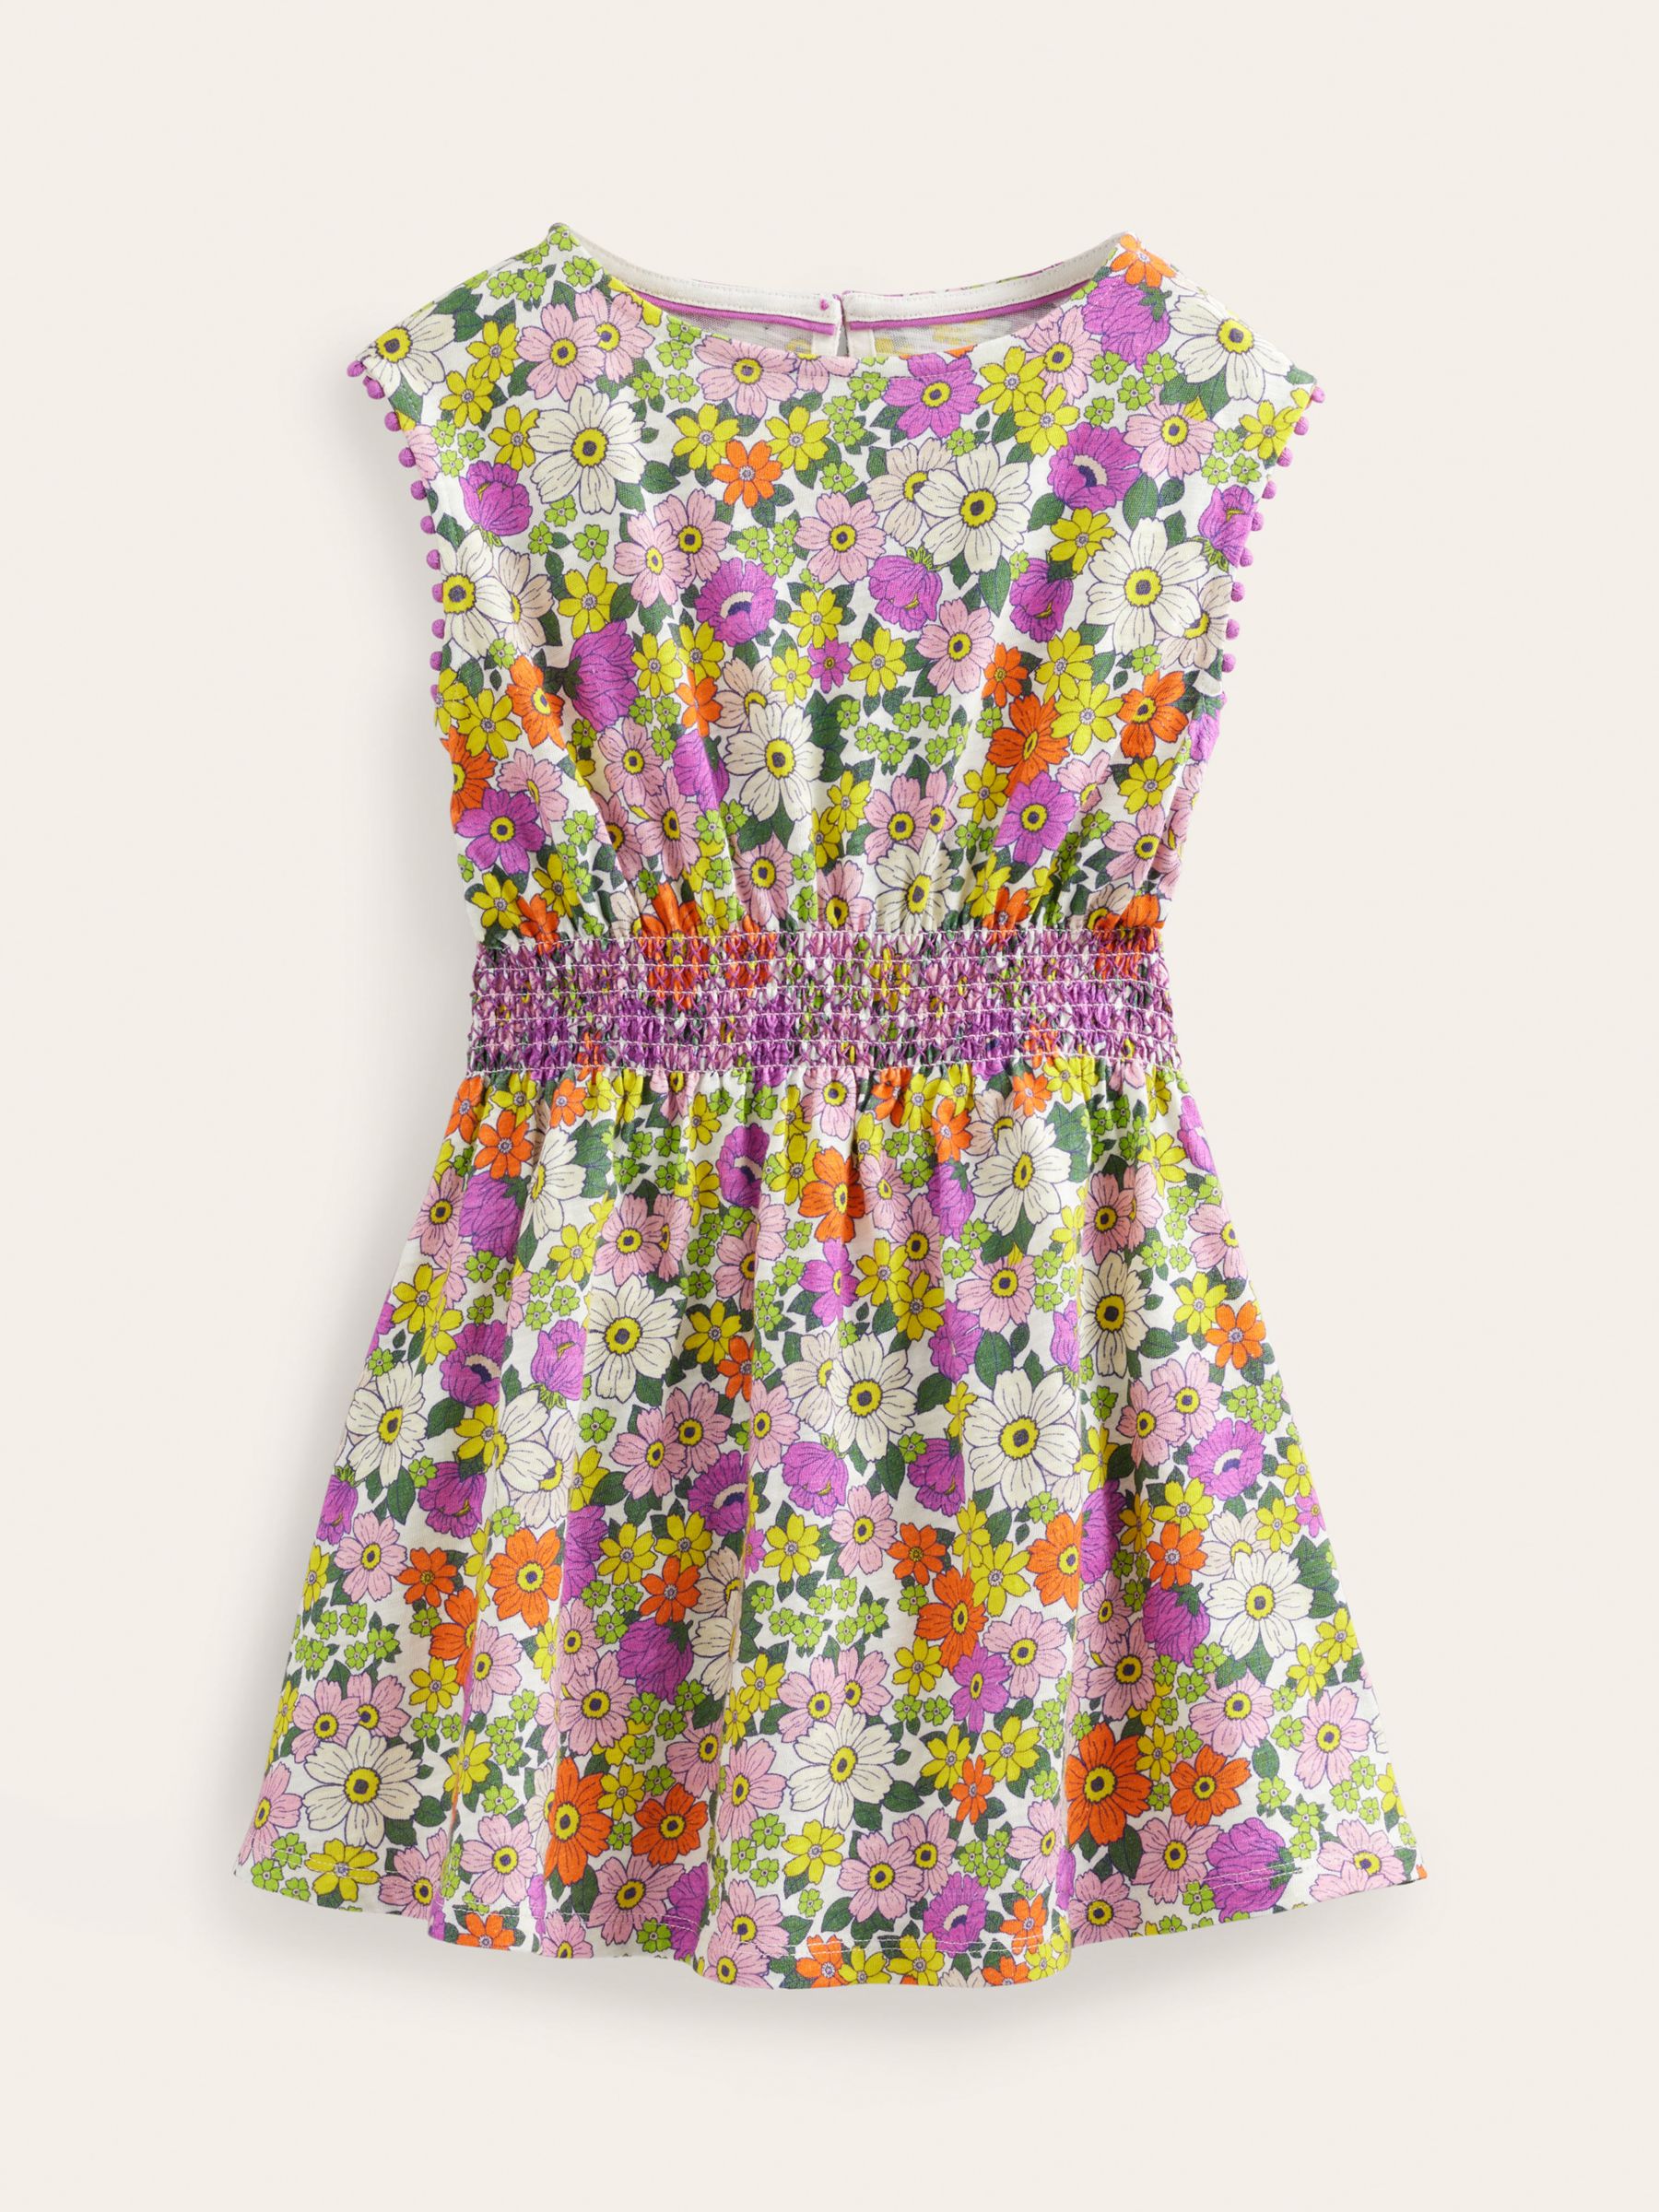 Mini Boden Kids' Floral Print Holiday Dress, Ivory/Radiant Orchid